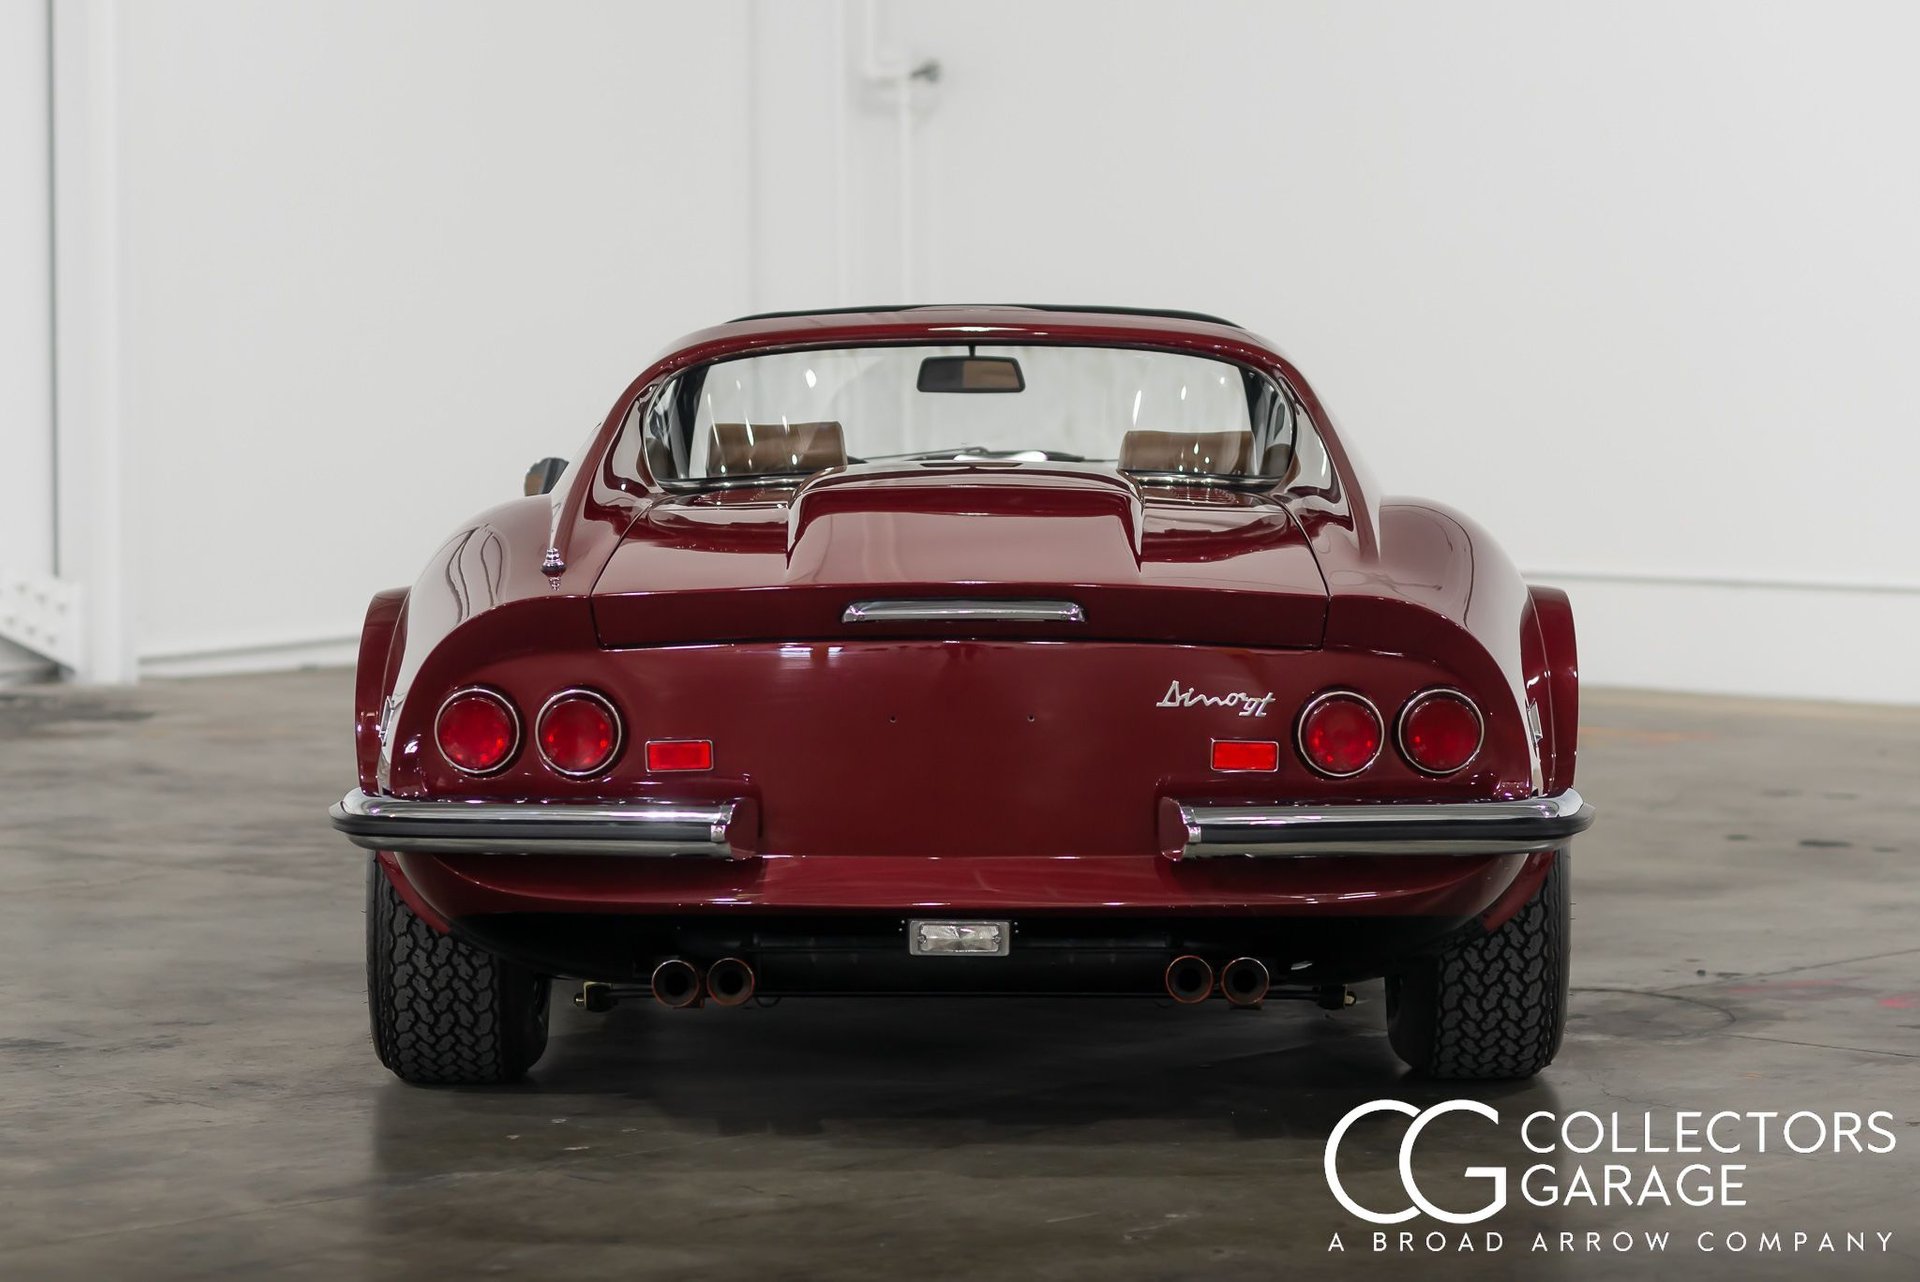 For Sale 1973 Ferrari 246 Dino GTS 'Chairs and Flares'